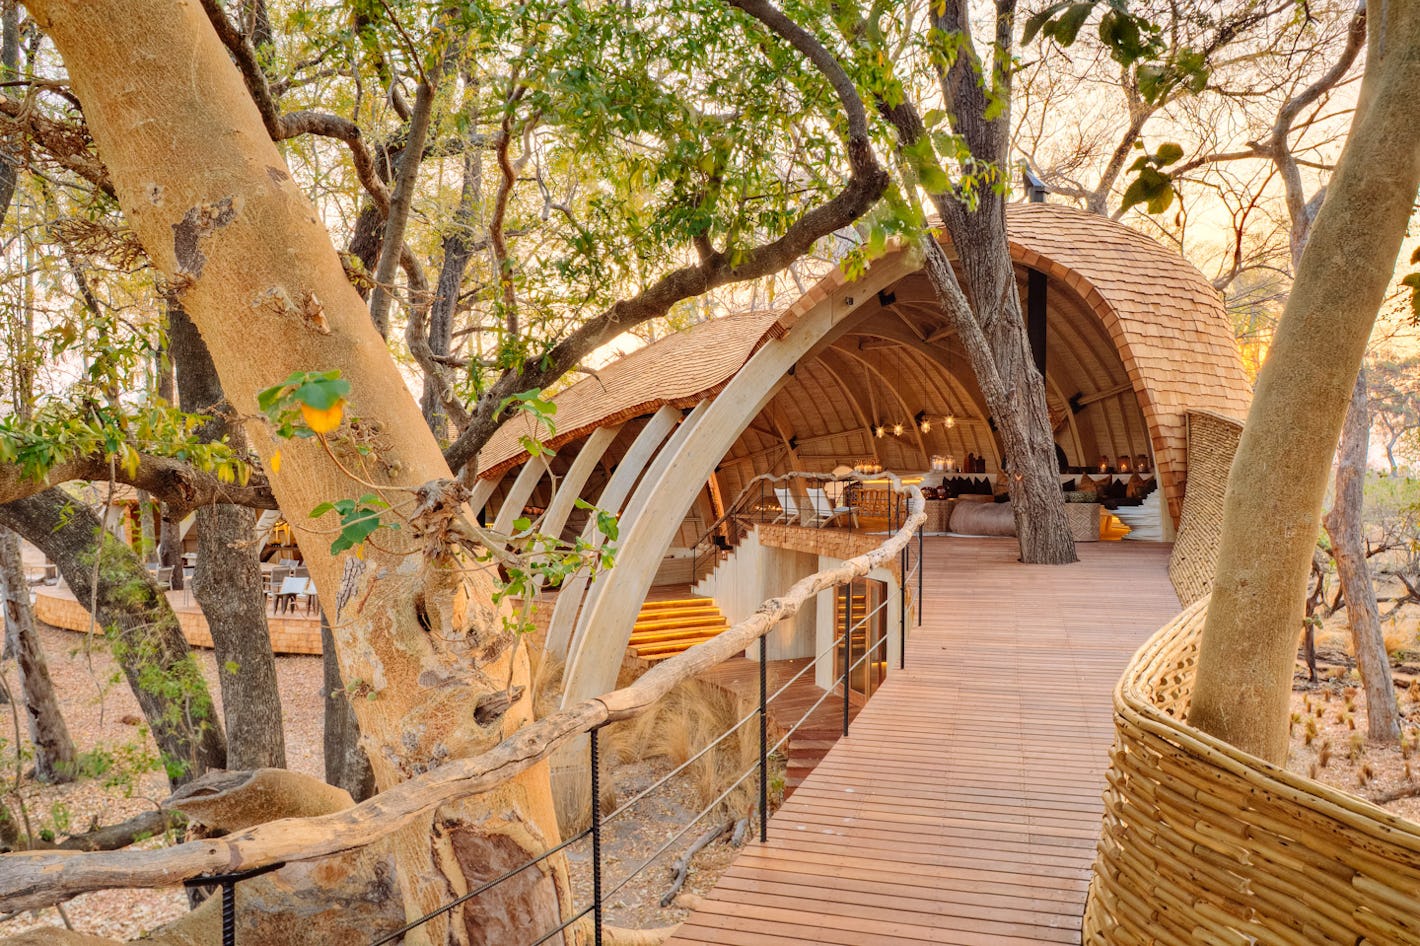 This camp is unique in its combination of luxury retreat and Okavango Delta roaming. The shady lodge and game-rich environment ensure a safari experience to remember.